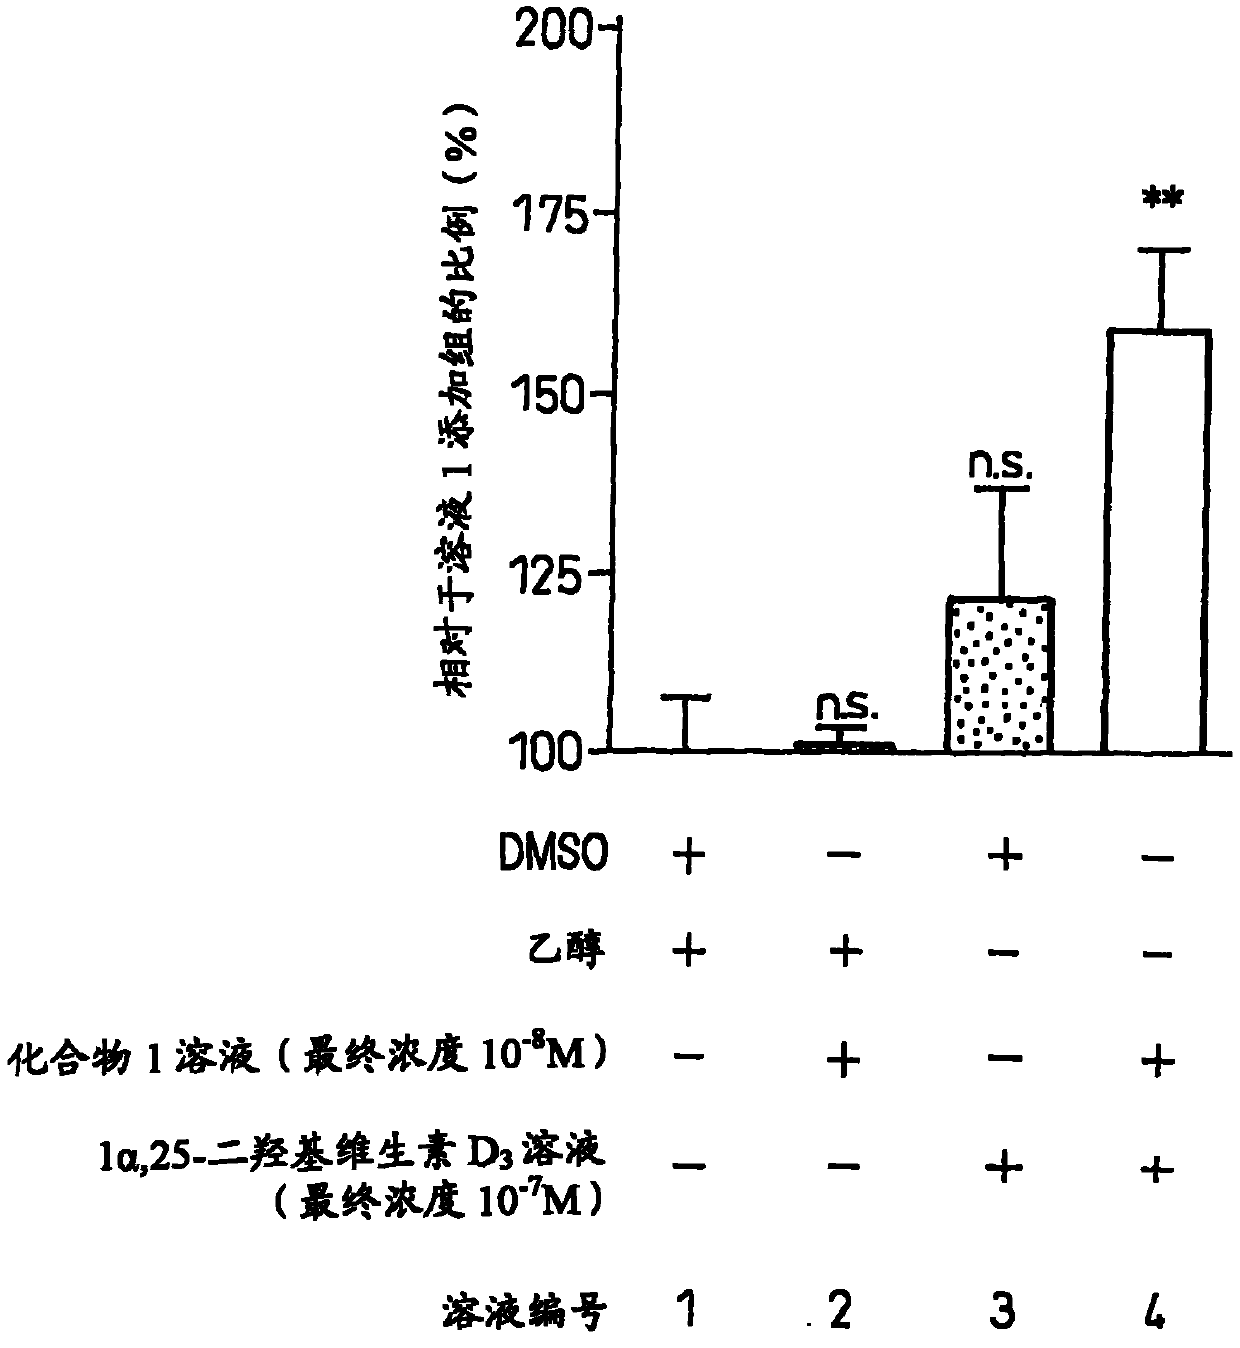 Prophylactic or therapeutic agent for diseases associated with abnormal bone metabolism